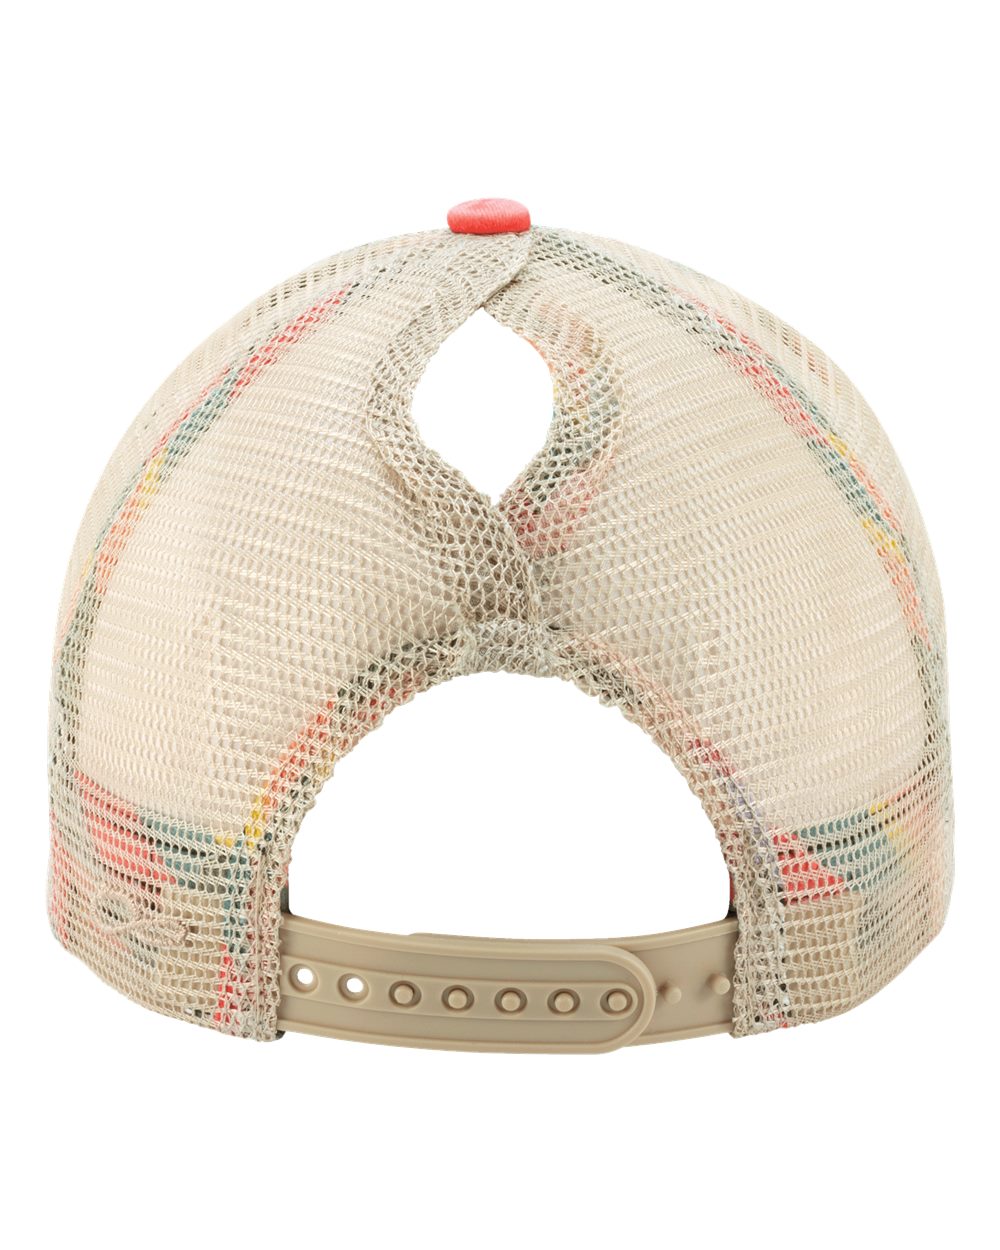 406 Love embroidered Dusty Sherbet/Stripes ponytail hat